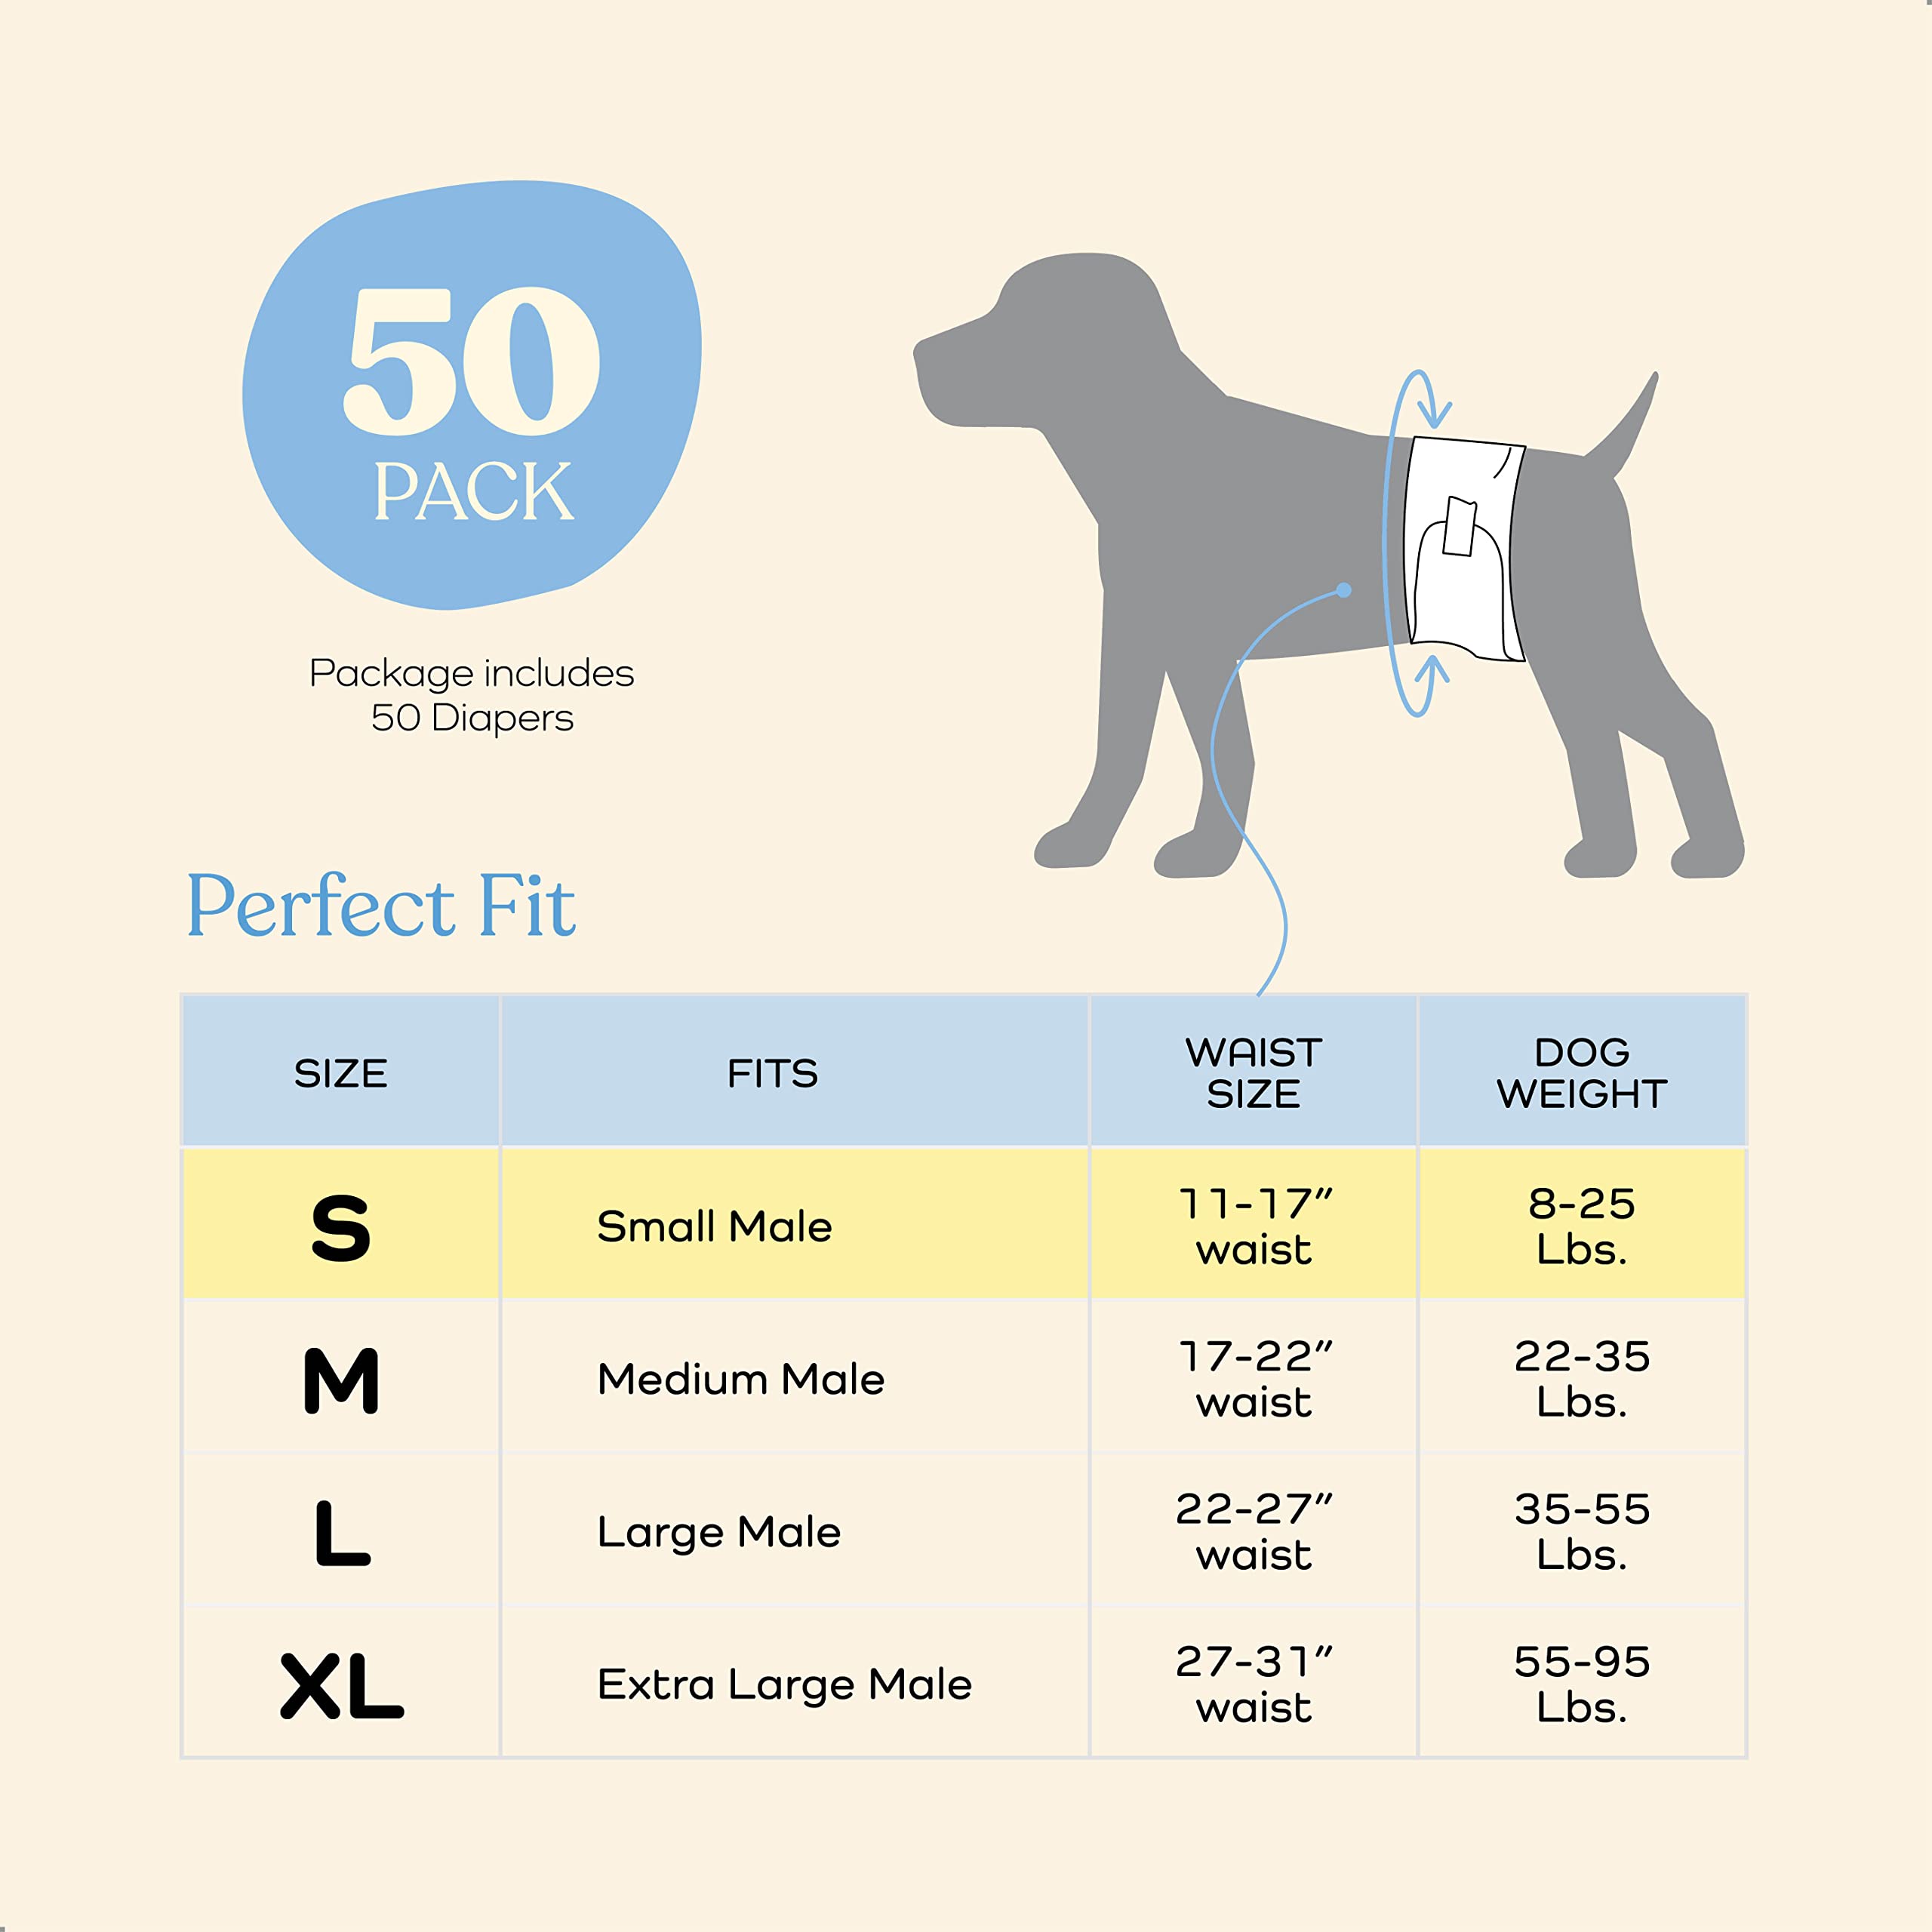 Comfortable Male Dog Diapers - Super Absorbent Disposable Male Dog Wraps- FlashDry Gel Technology, Wetness Indicator Doggie Diapers- Leakproof Belly Wraps for Incontinence, Excitable Urination  - Like New